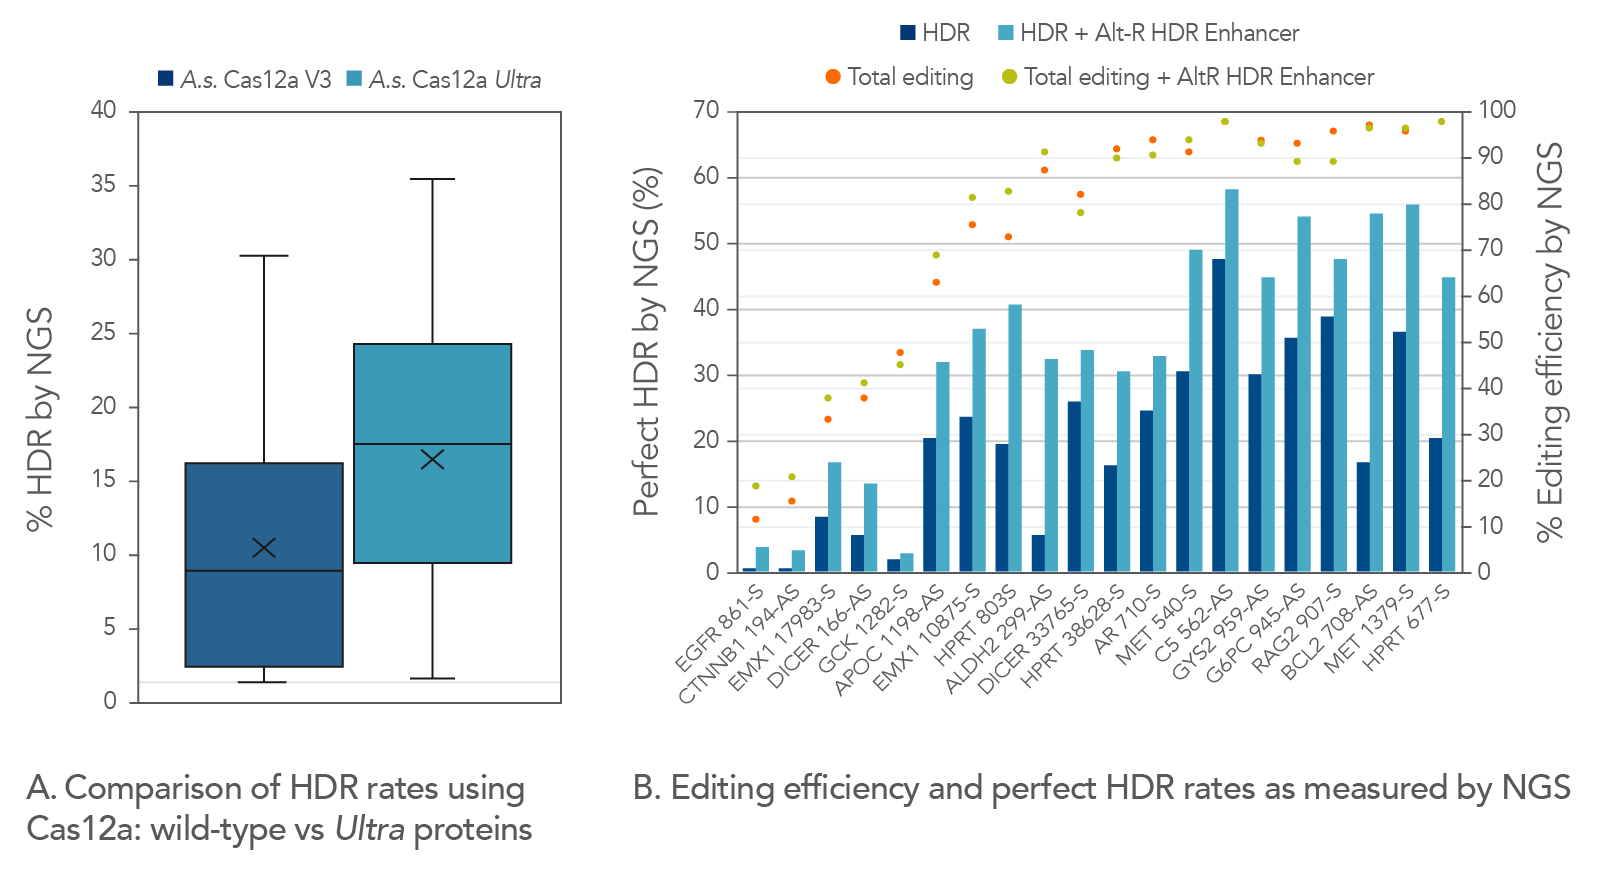 High HDR rates with Alt-R Cas12a Ultra protein and HDR Enhancer